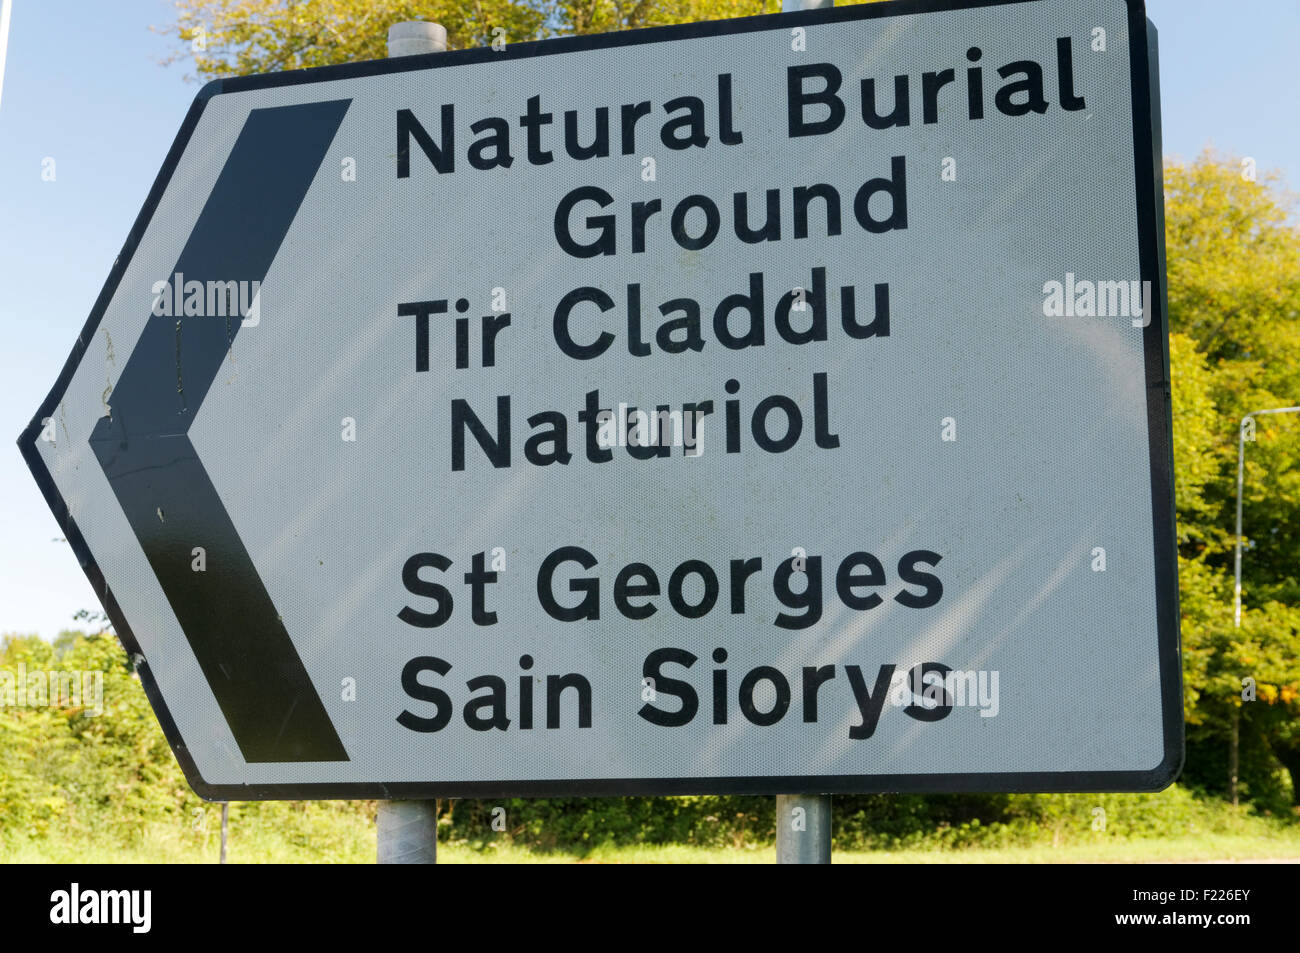 Sign for St Georges Natural Burial Ground, Vale of Glamorgan, South Wales, UK. Stock Photo